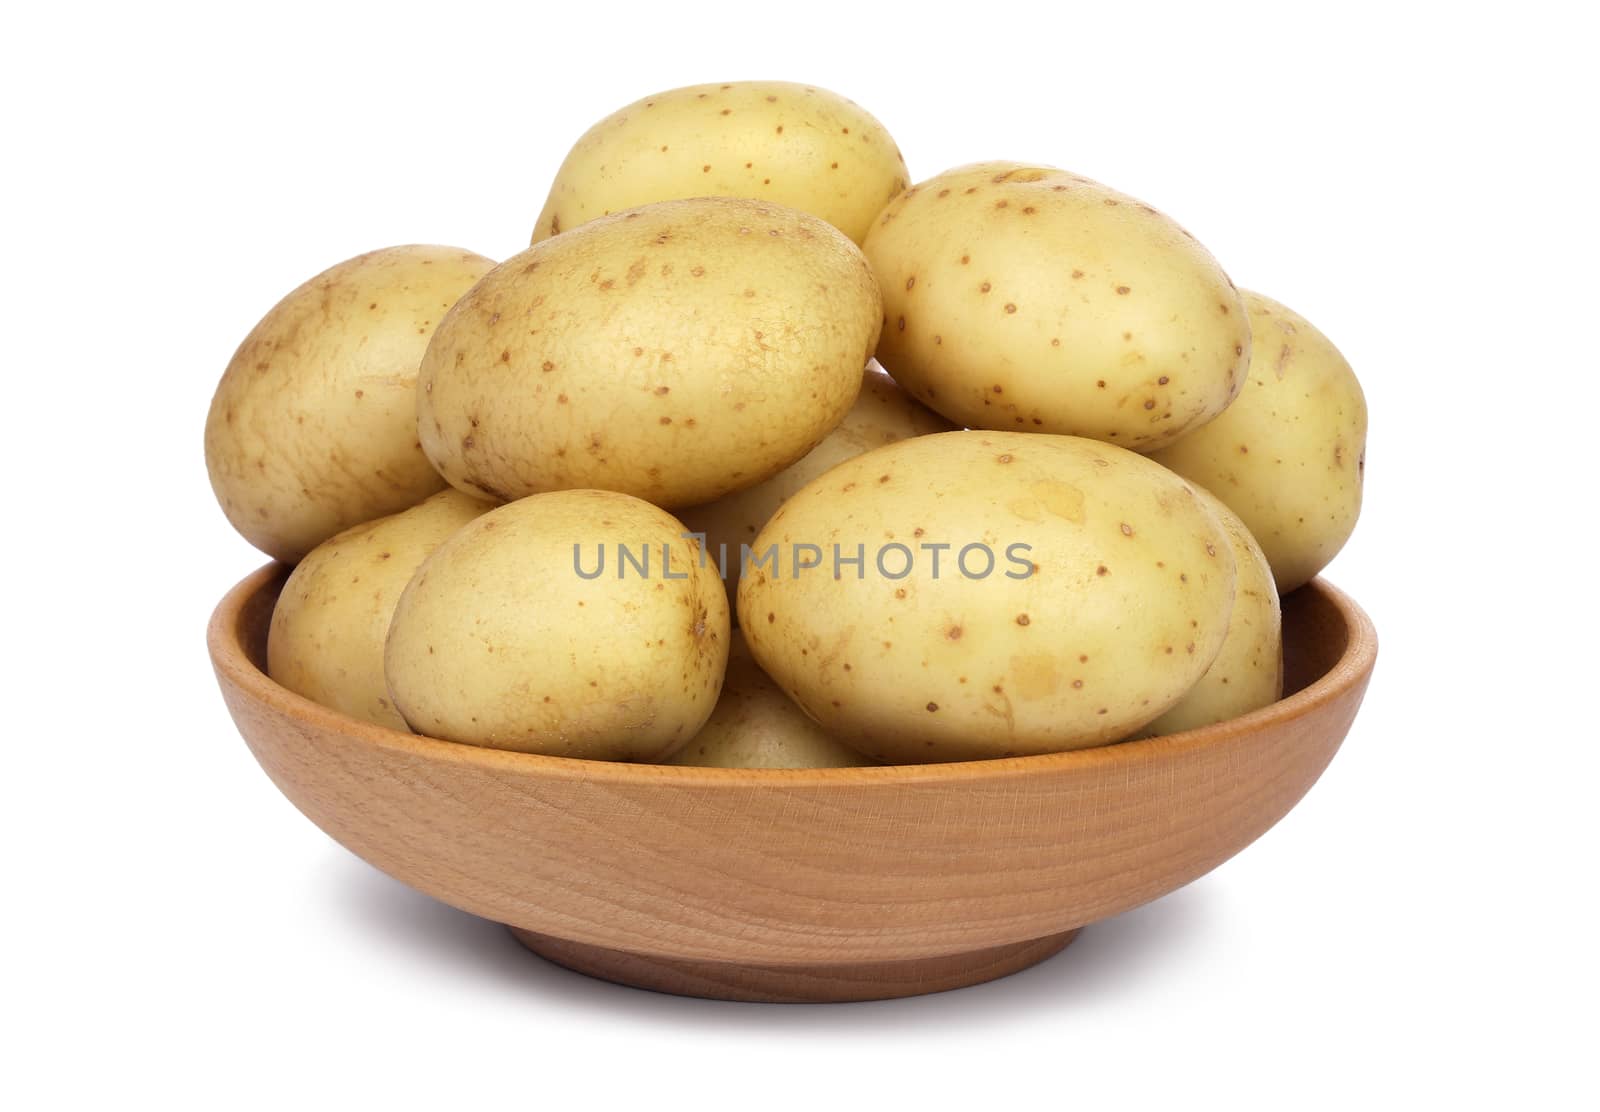 Raw unpeeled potatoes in a wooden bowl, isolated on white background.